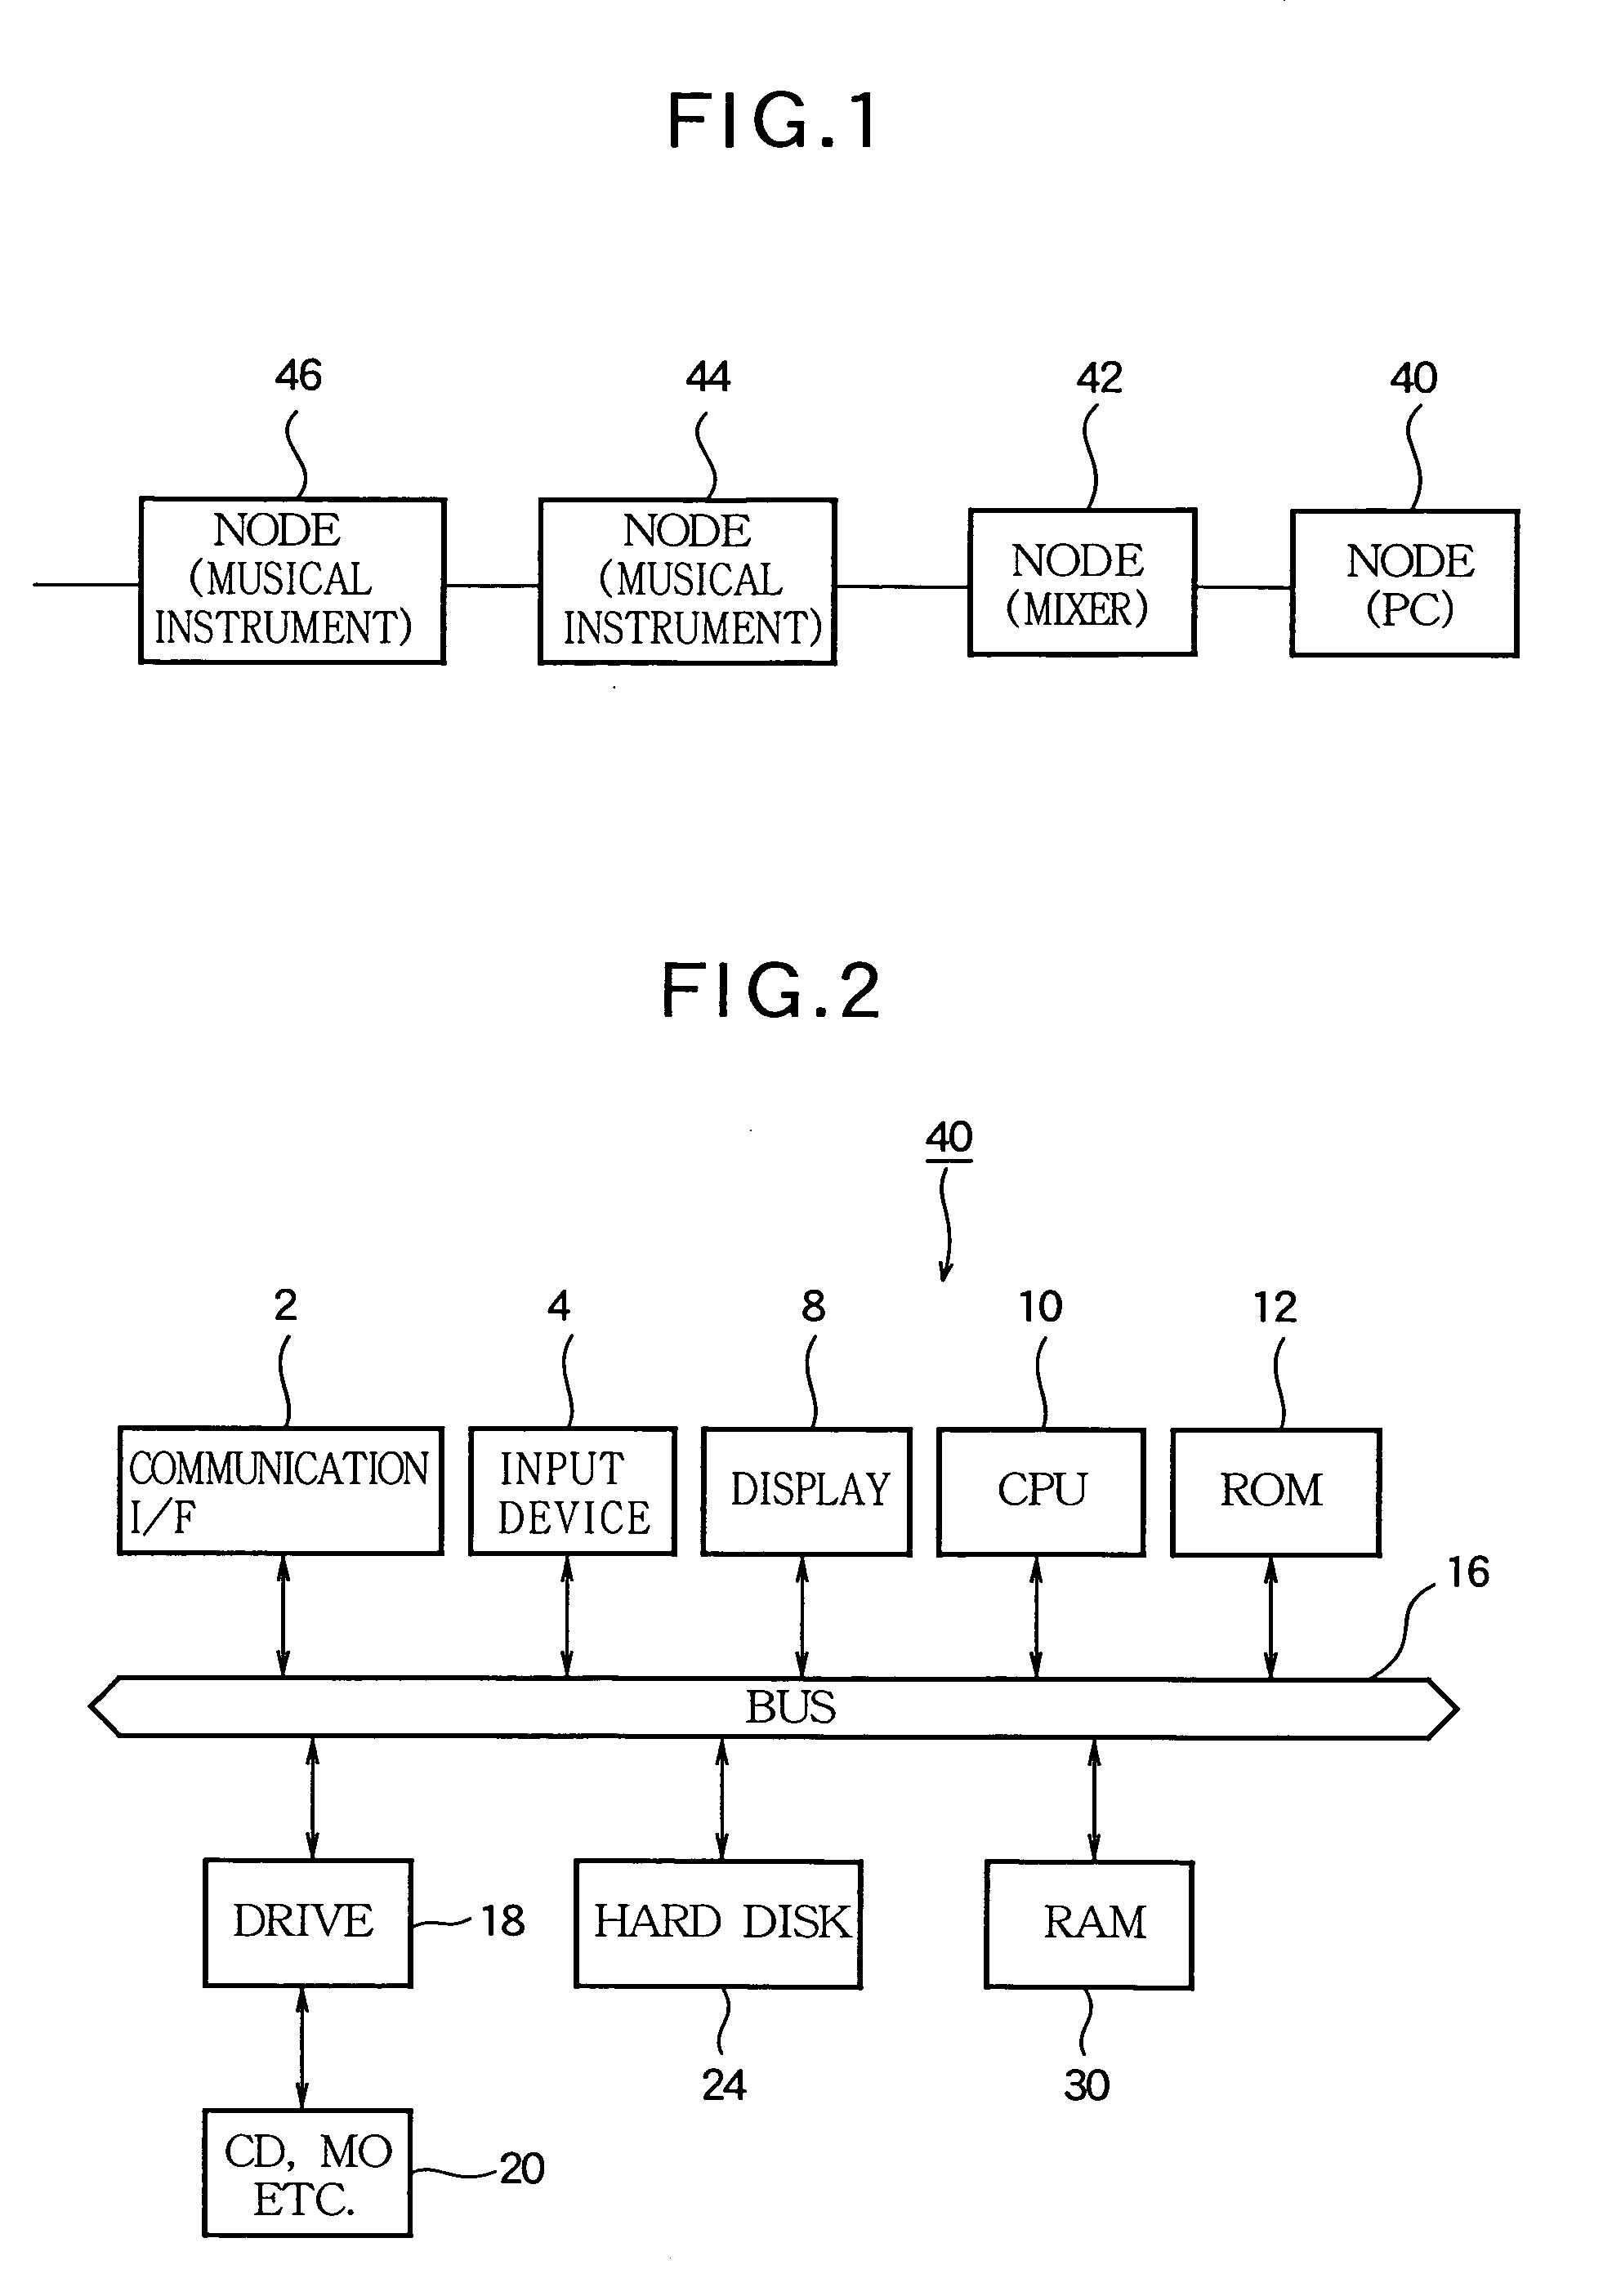 Apparatus for displaying formation of network